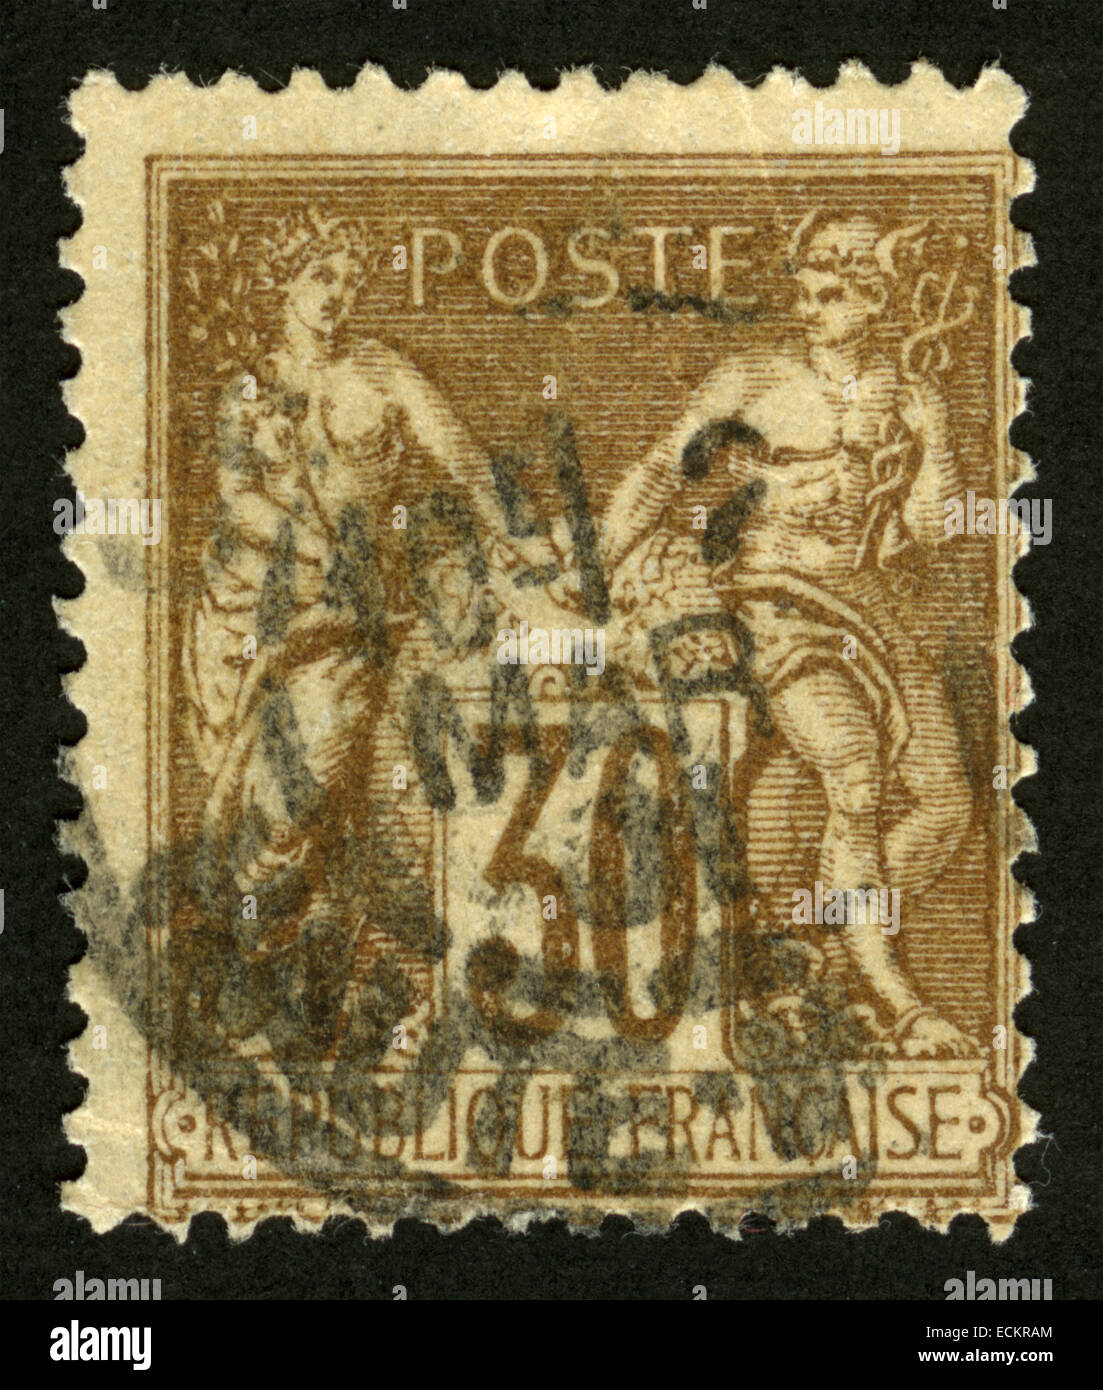 France,circa 1885, Peace and commerce (Type Sage),postage stamp Stock Photo